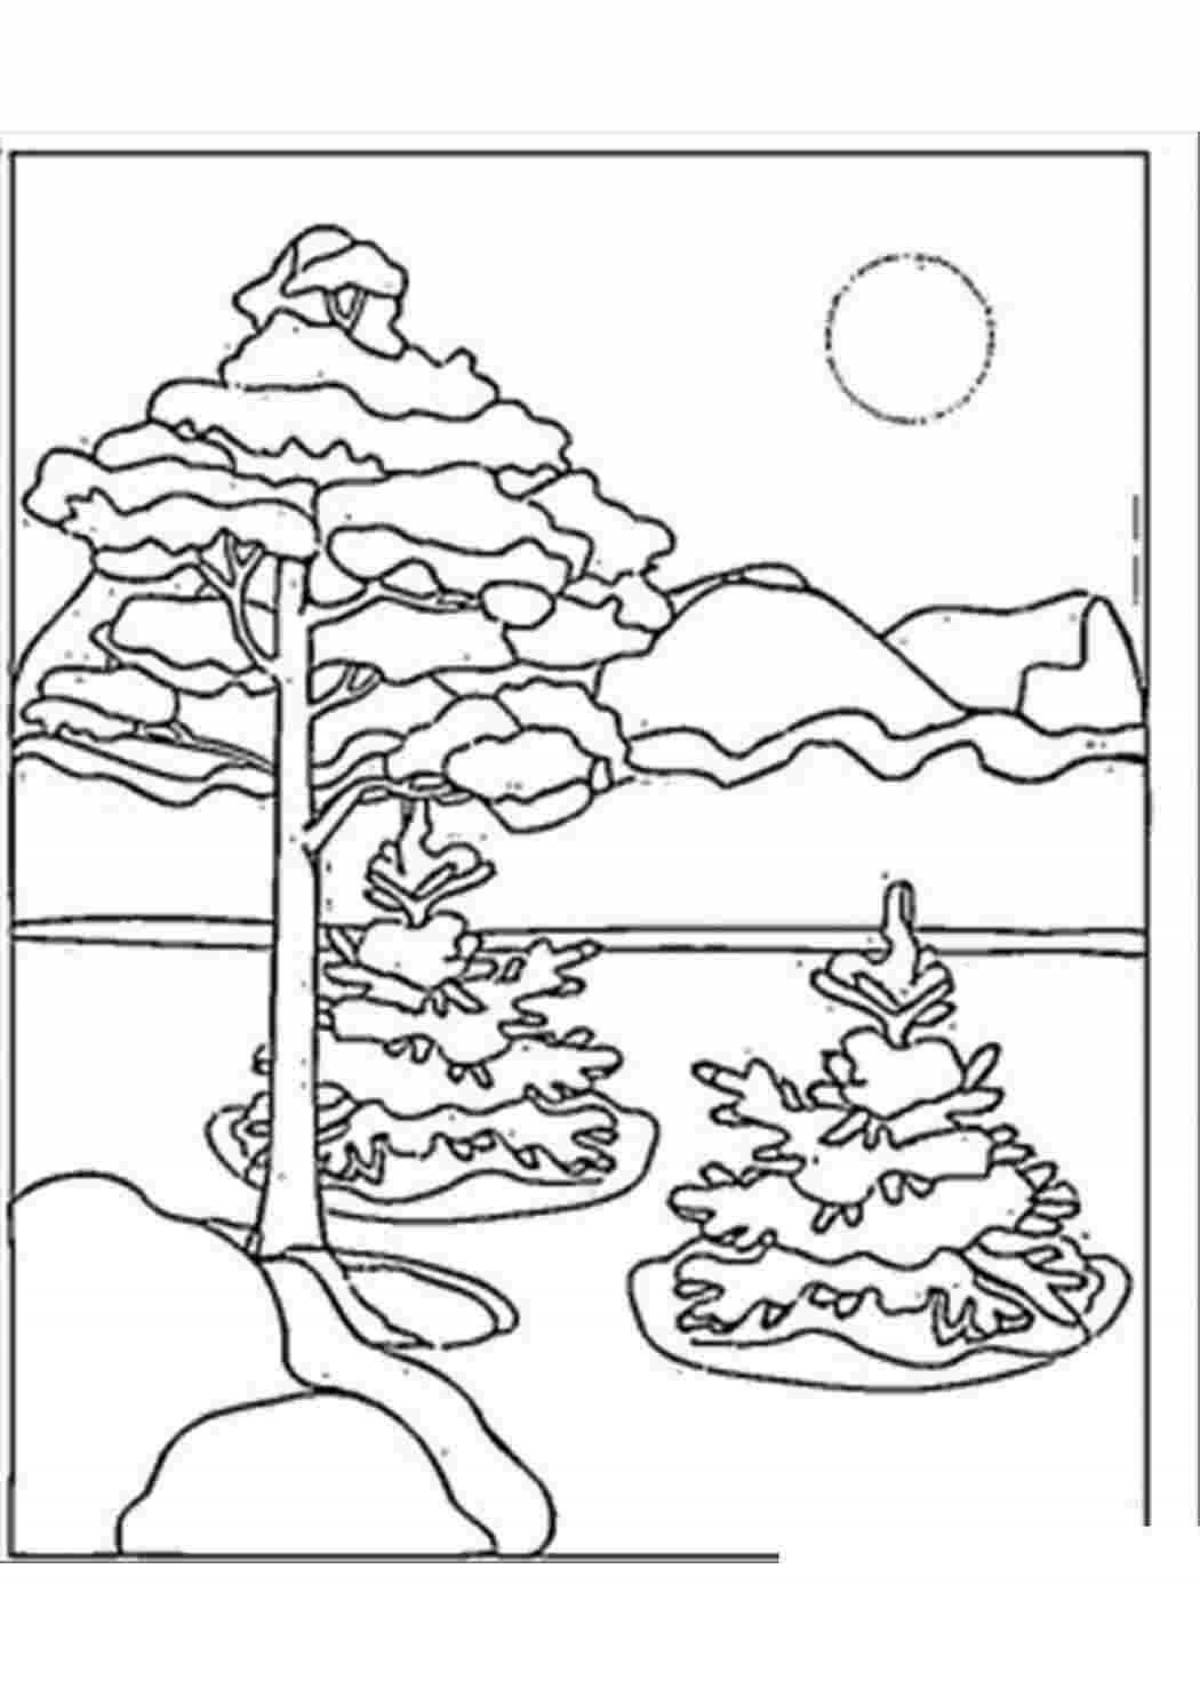 Coloring page blissful winter nature